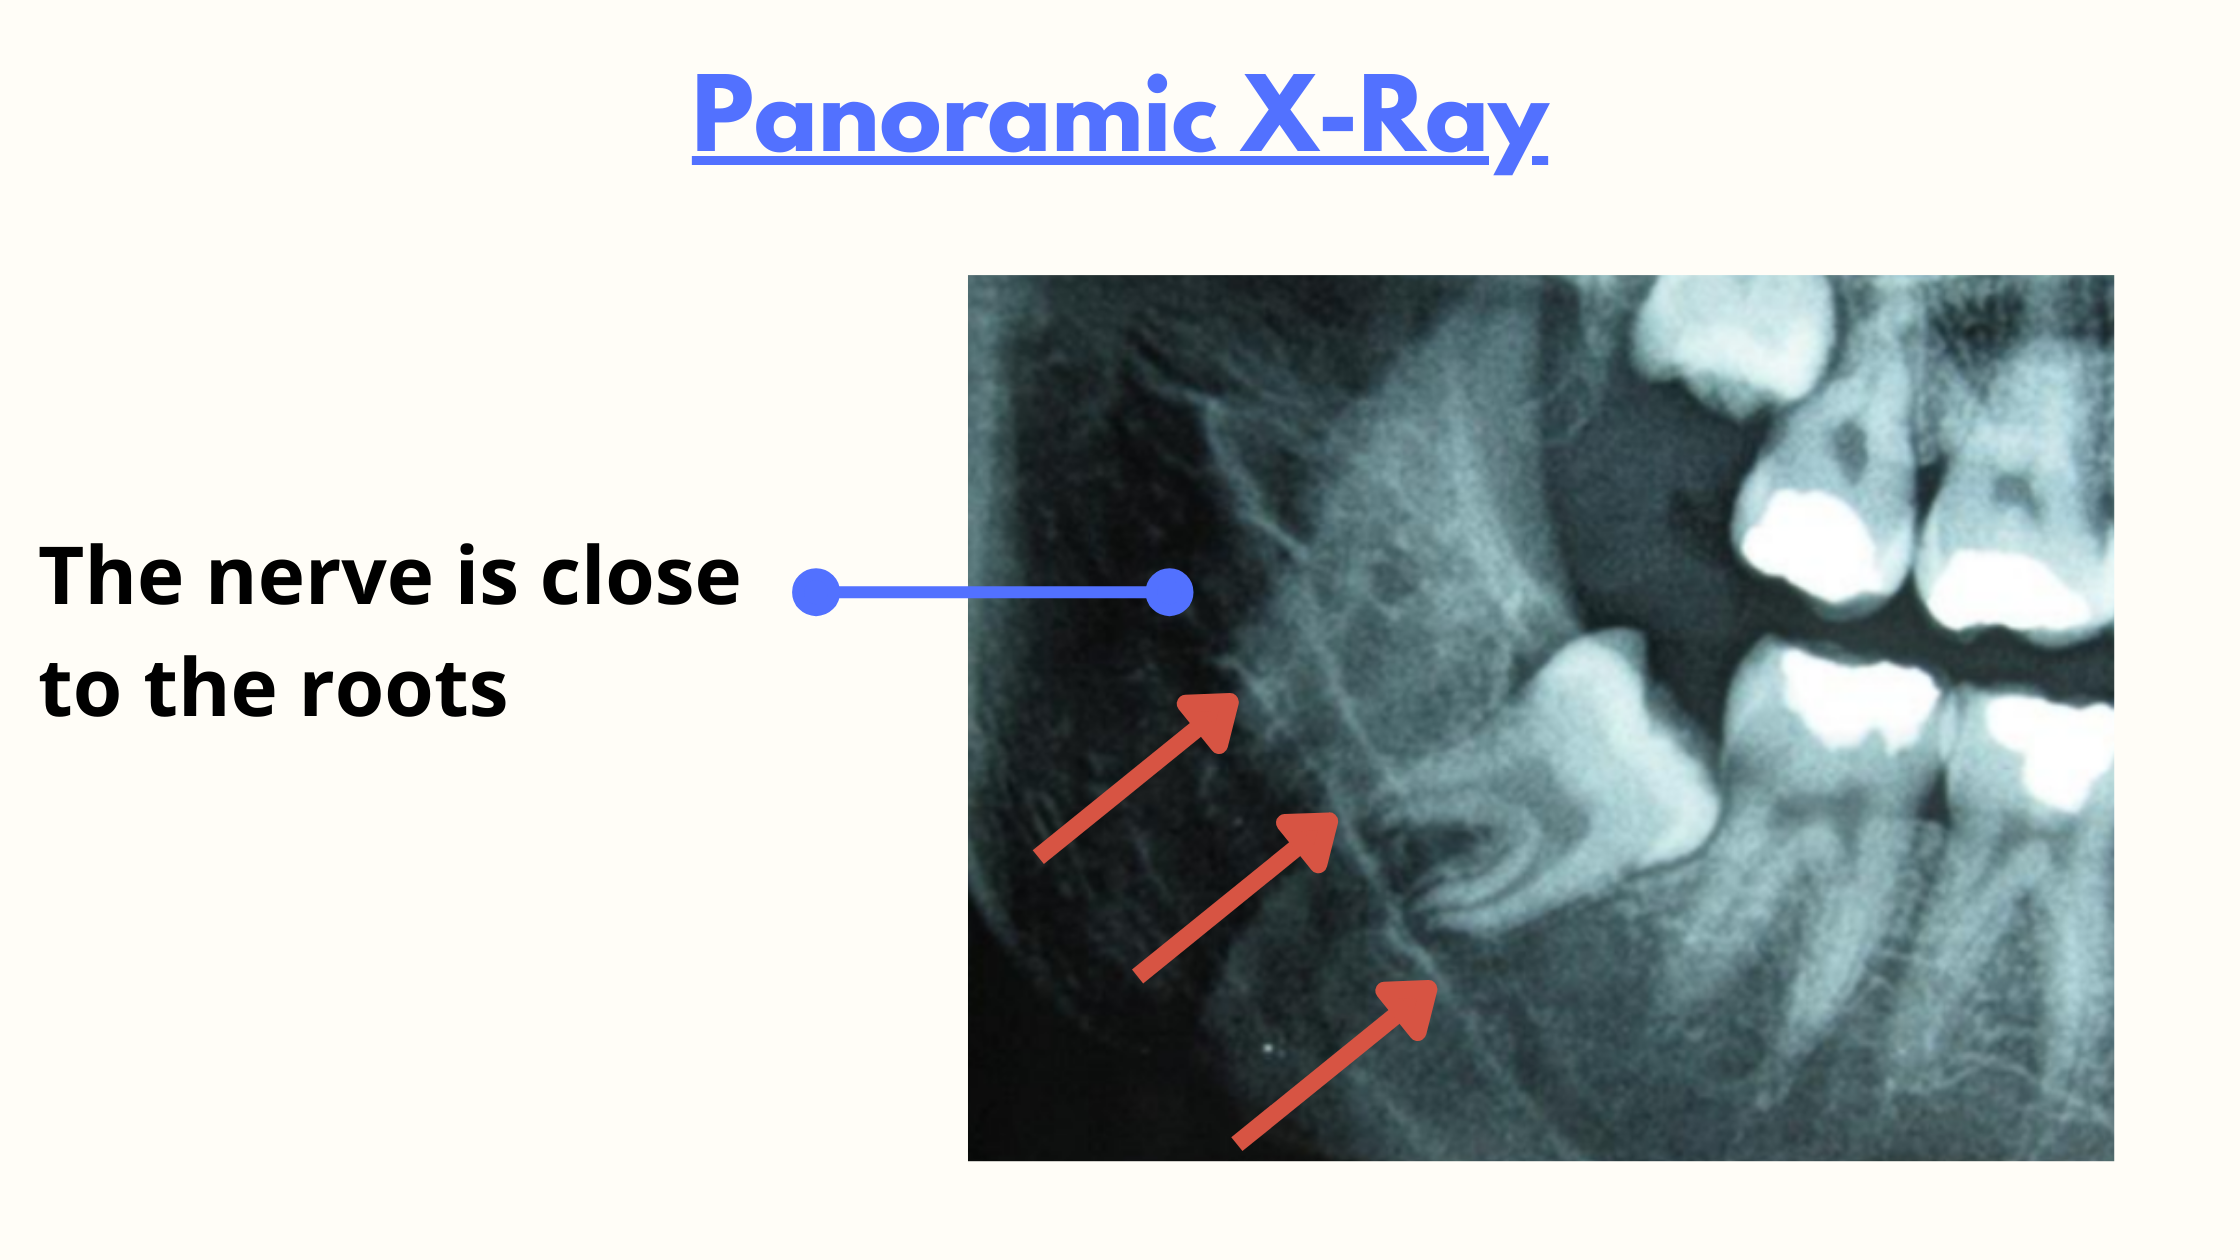 Panoramic x-ray showing the inferior alveolar canal close to the roots